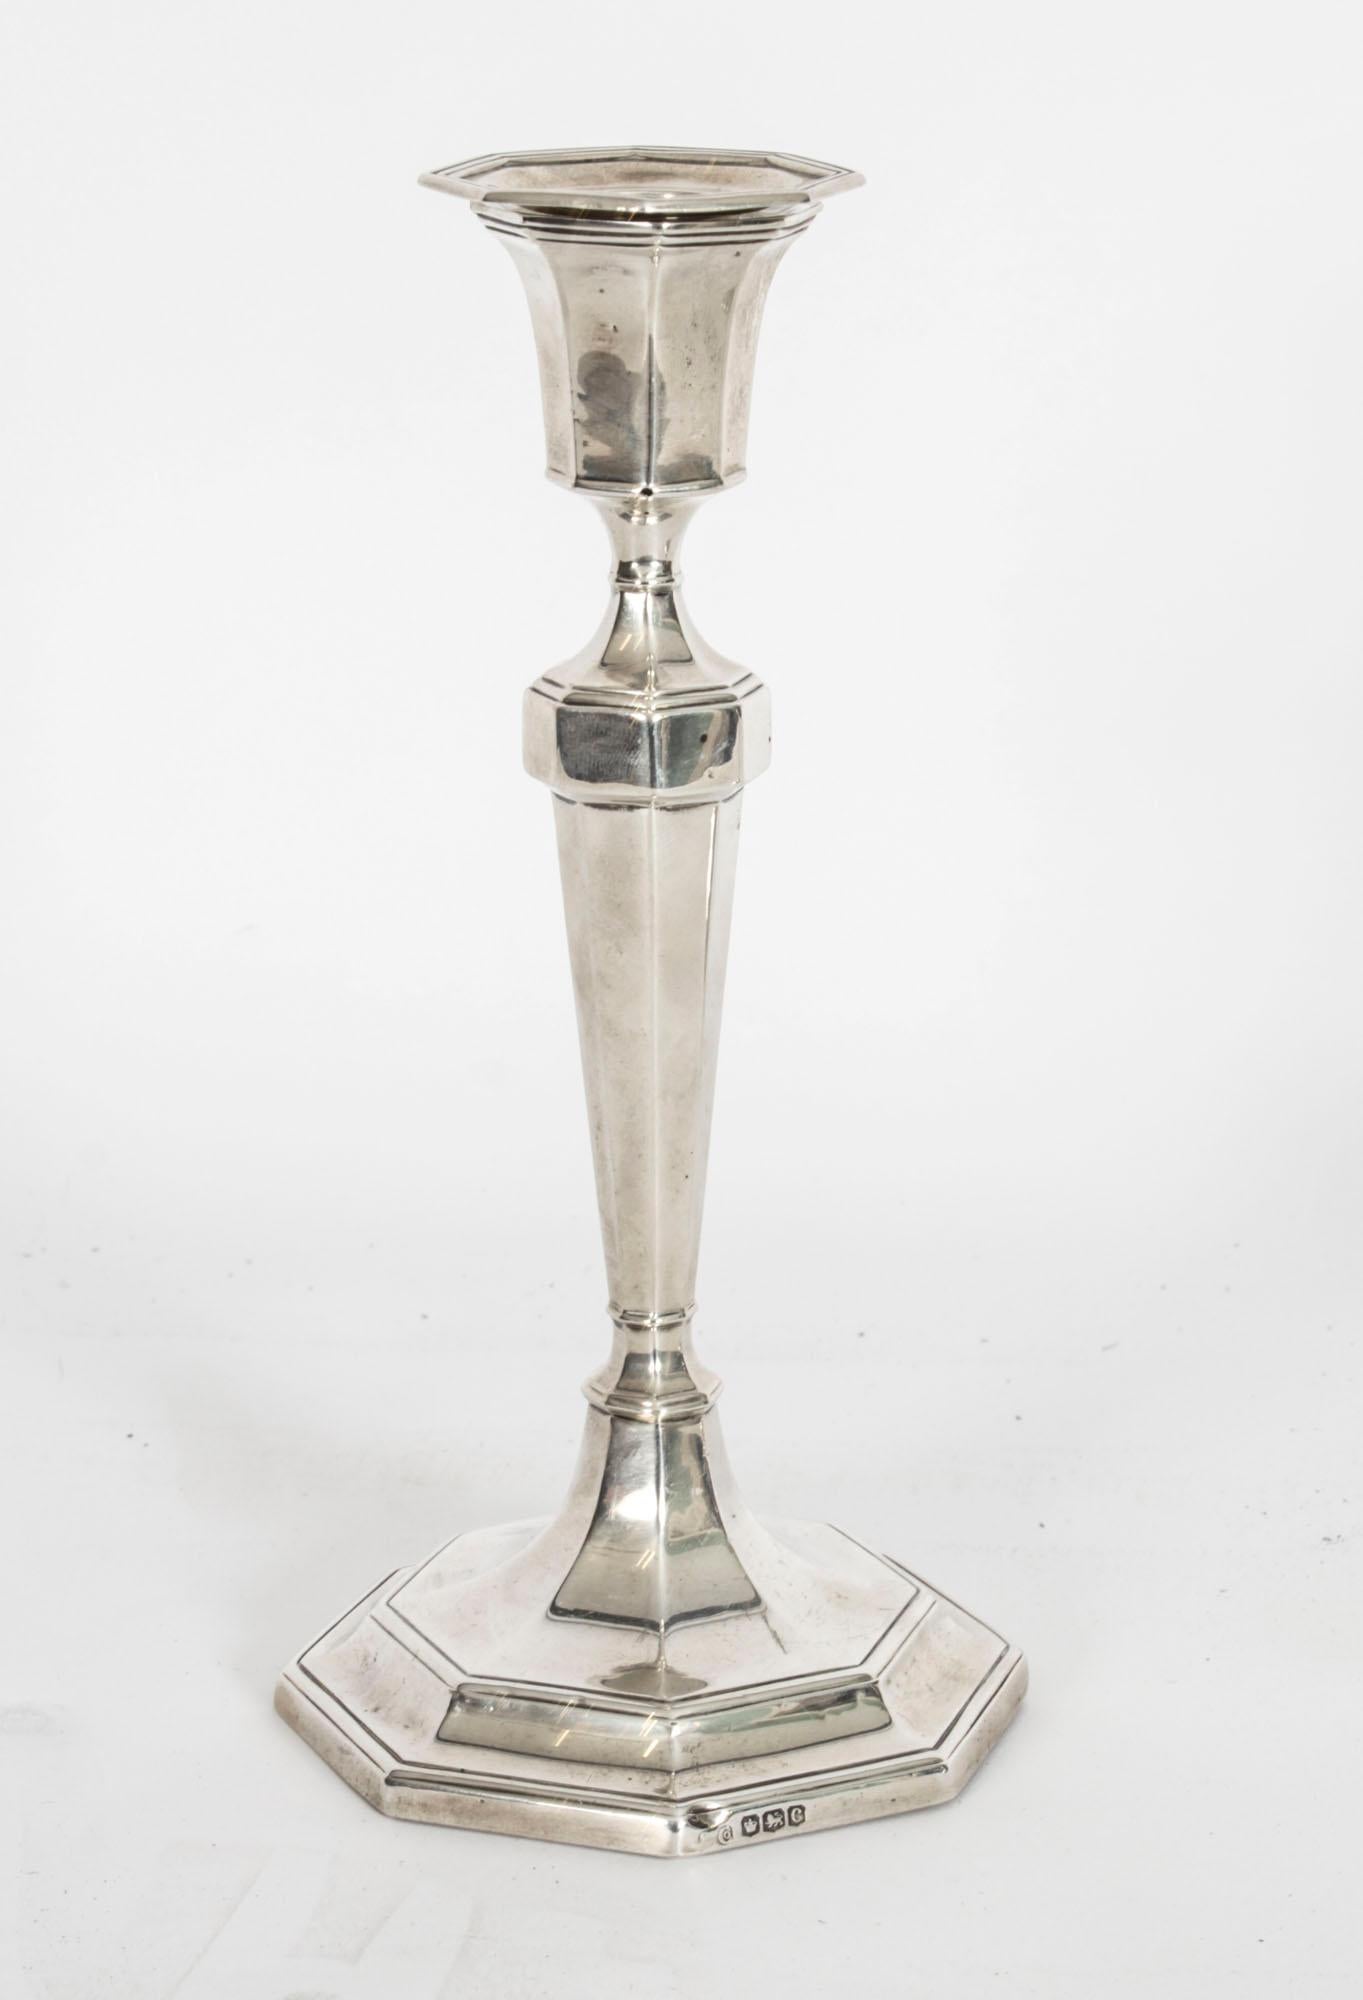 This is an exquisite pair of 1920s sterling silver candlesticks of tapering octagonal form, with separate sconces, on octagonal pedestal bases bearing hallmarks for Sheffield, dated 1920 and the makers mark of the renowned English silversmith